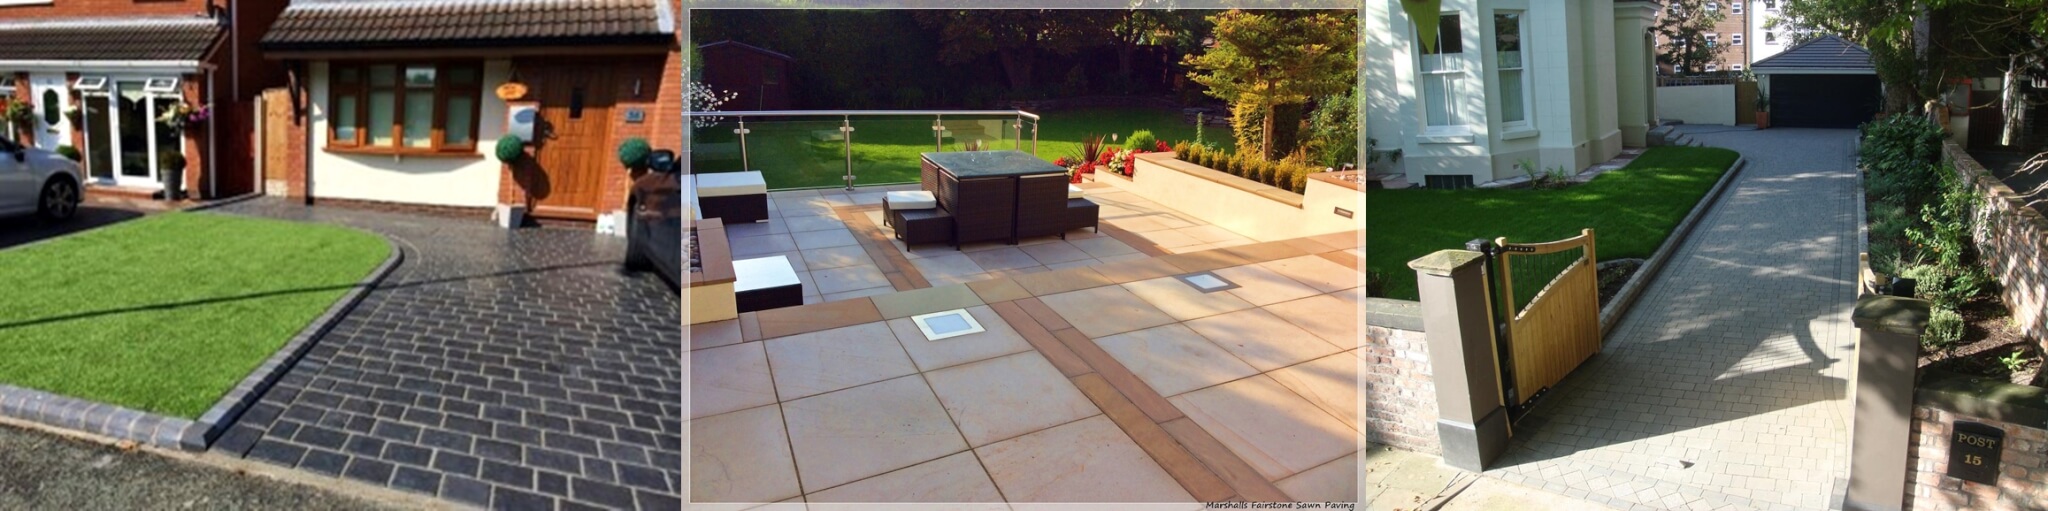 Landscaping and Driveways Company Cheshire